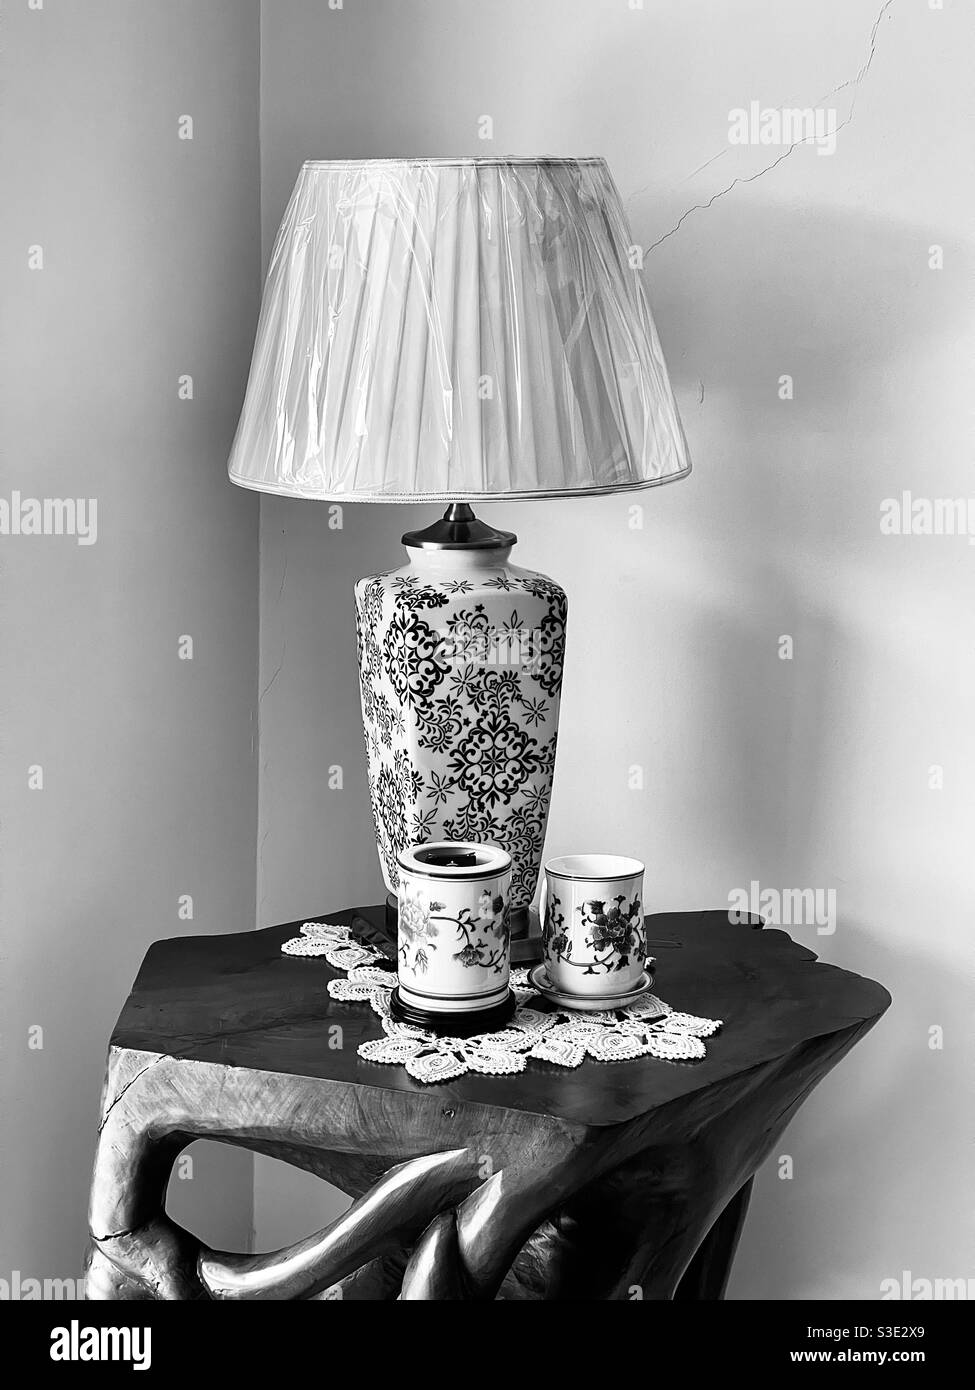 Home decoration- Table lamp on a drift wood Stock Photo